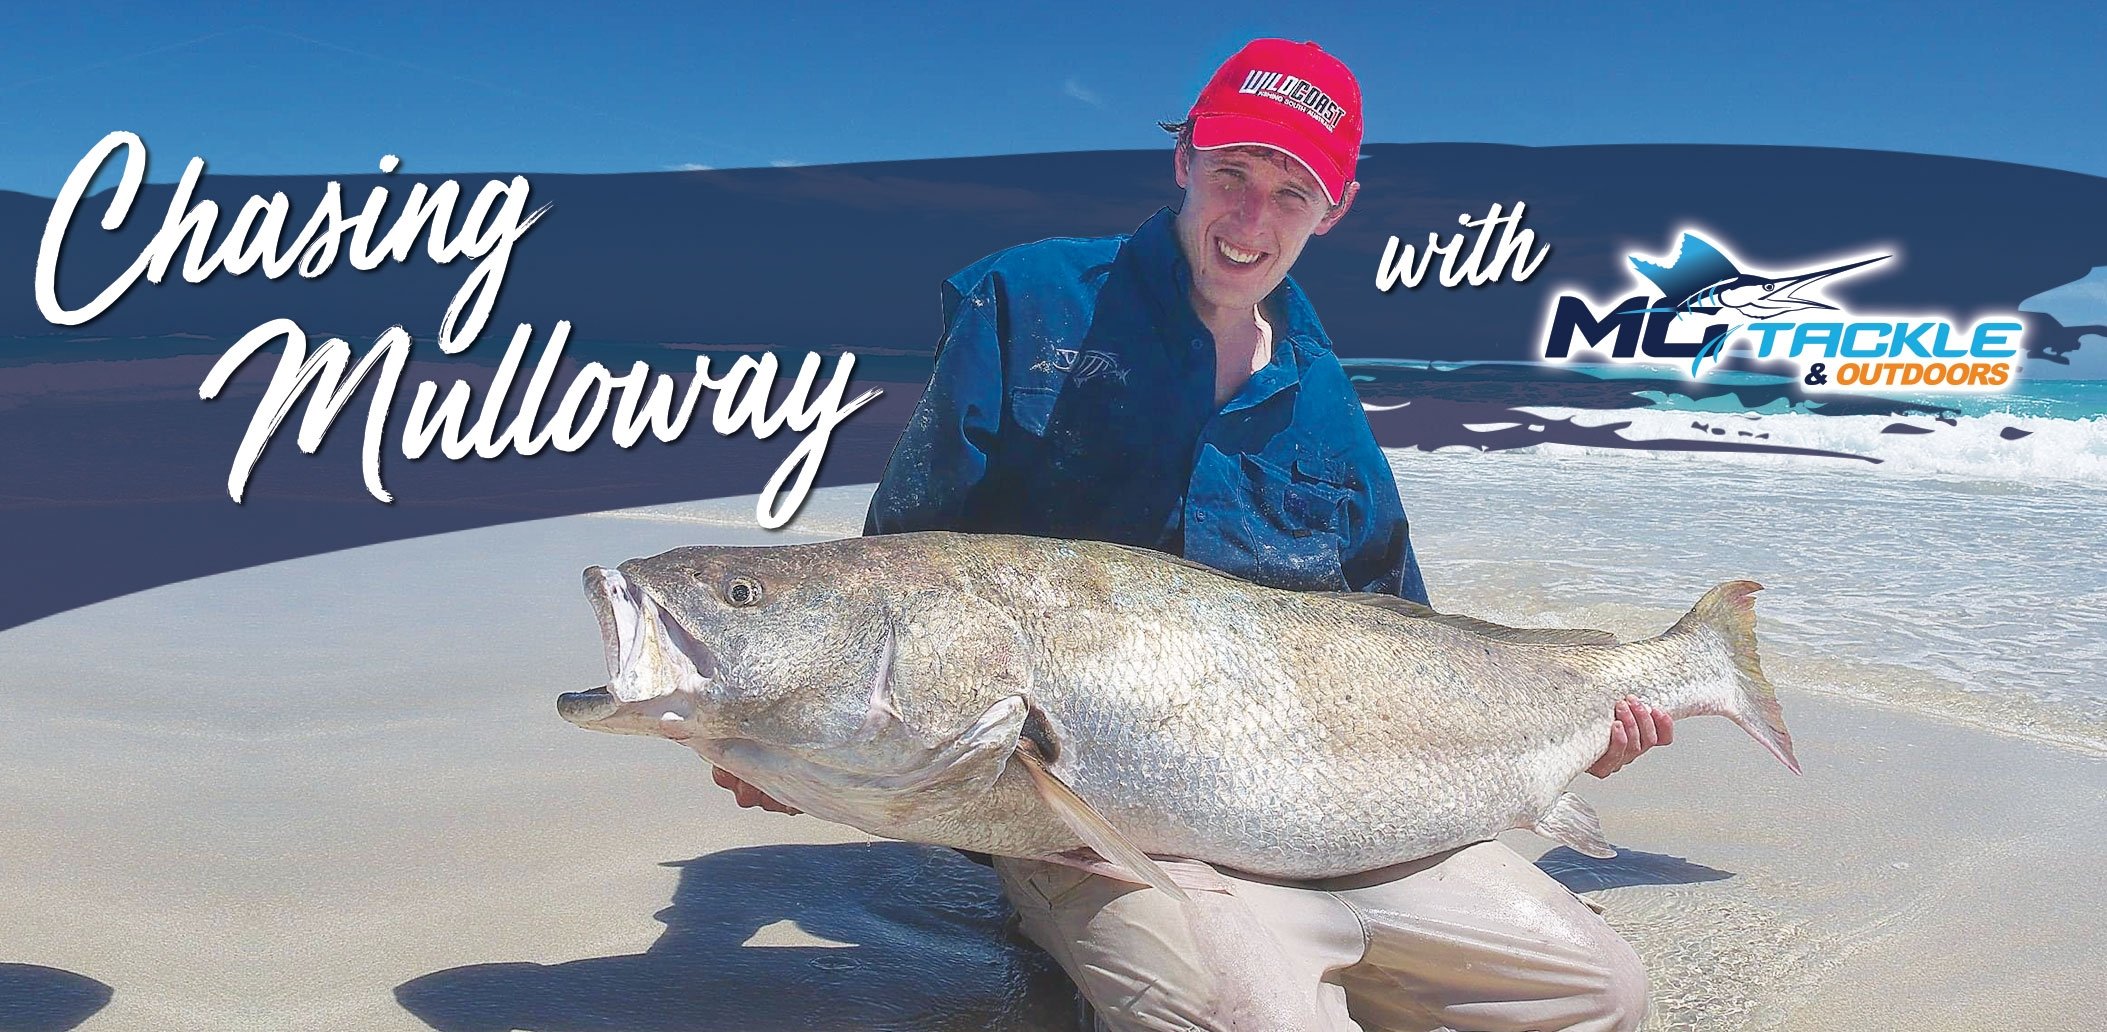 Chasing Mulloway With Motackle